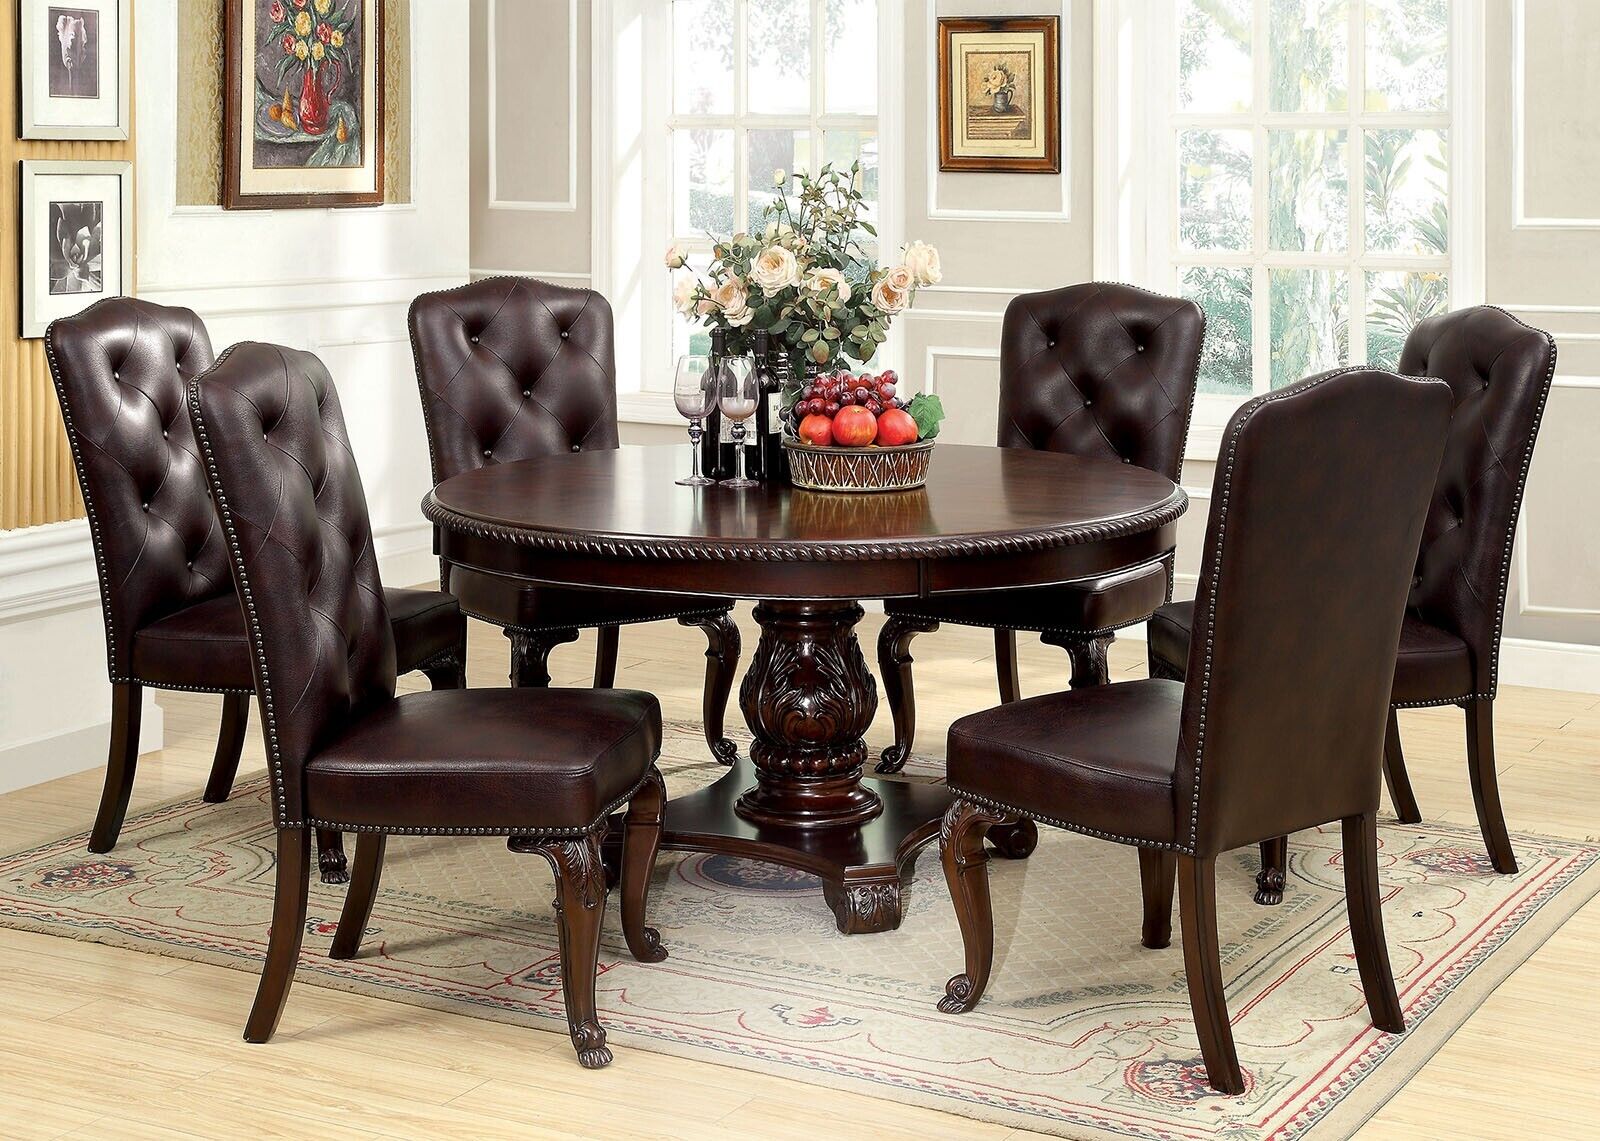 Esofastore Gorgeous Formal 7pc Dining Set Brown Cherry Solid wood Round Table And 6x Side Chairs Leatherette Tufted Cushion Seat Furniture